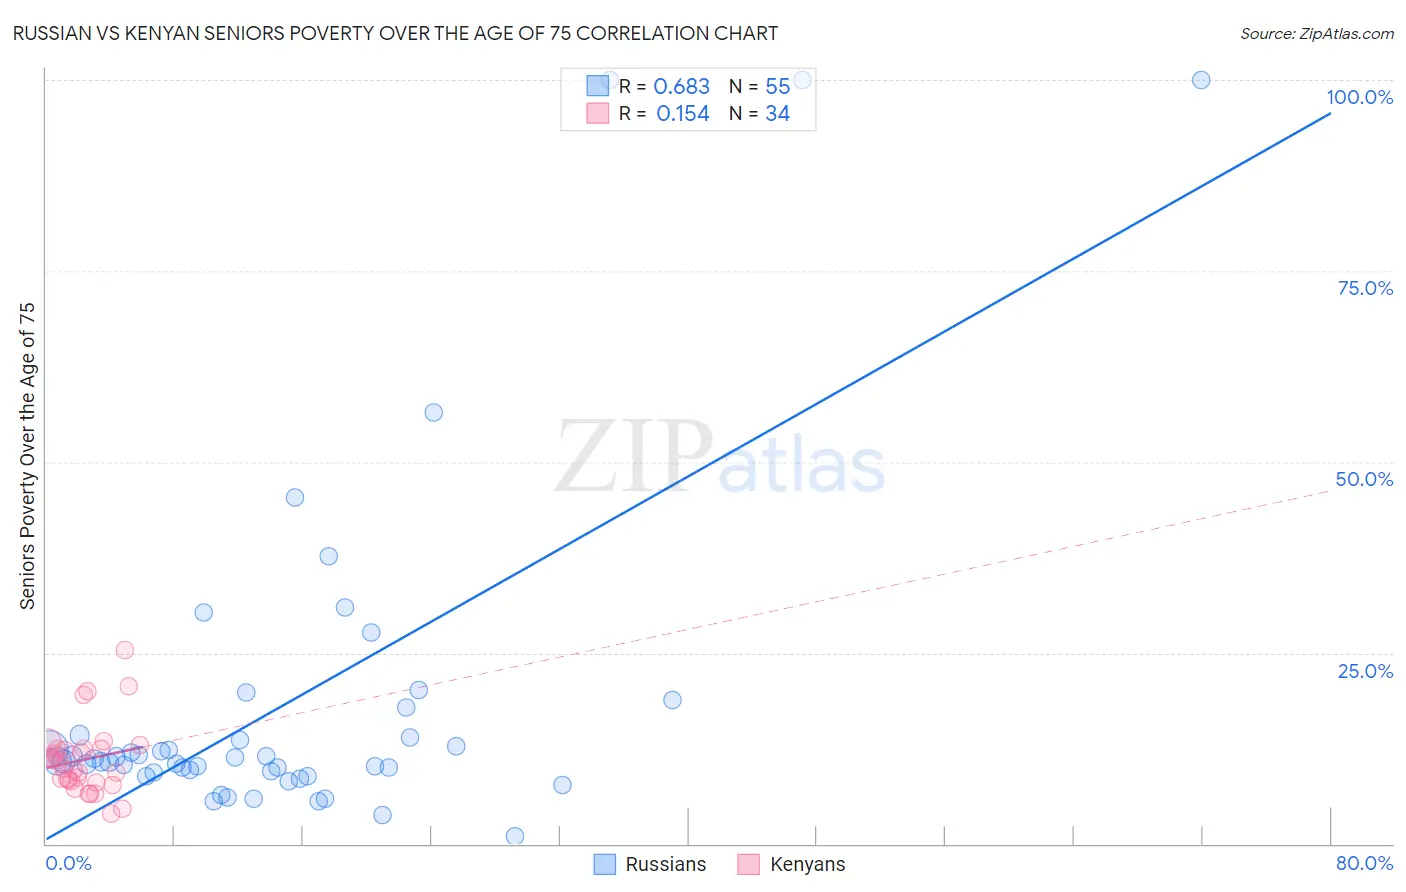 Russian vs Kenyan Seniors Poverty Over the Age of 75